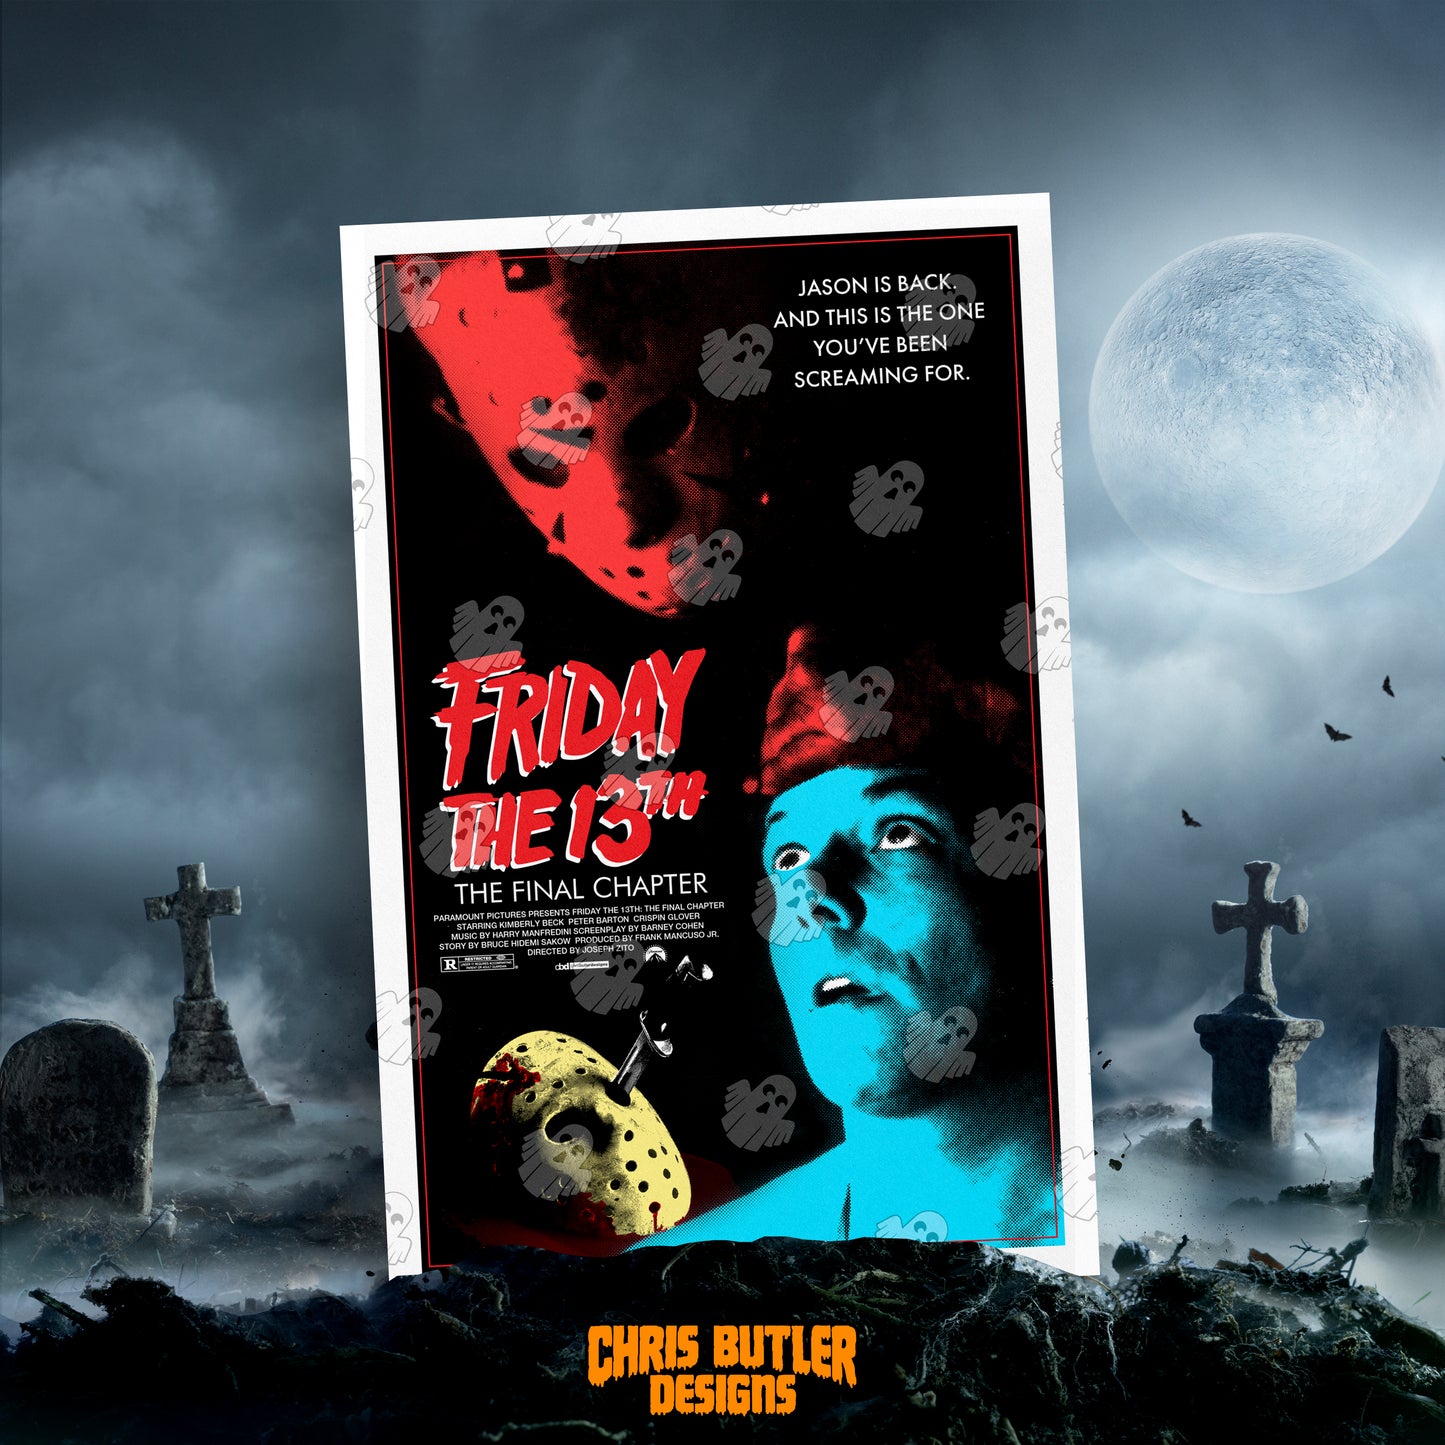 Friday The 13th: The Final Chapter 11x17 Alternative Movie Poster